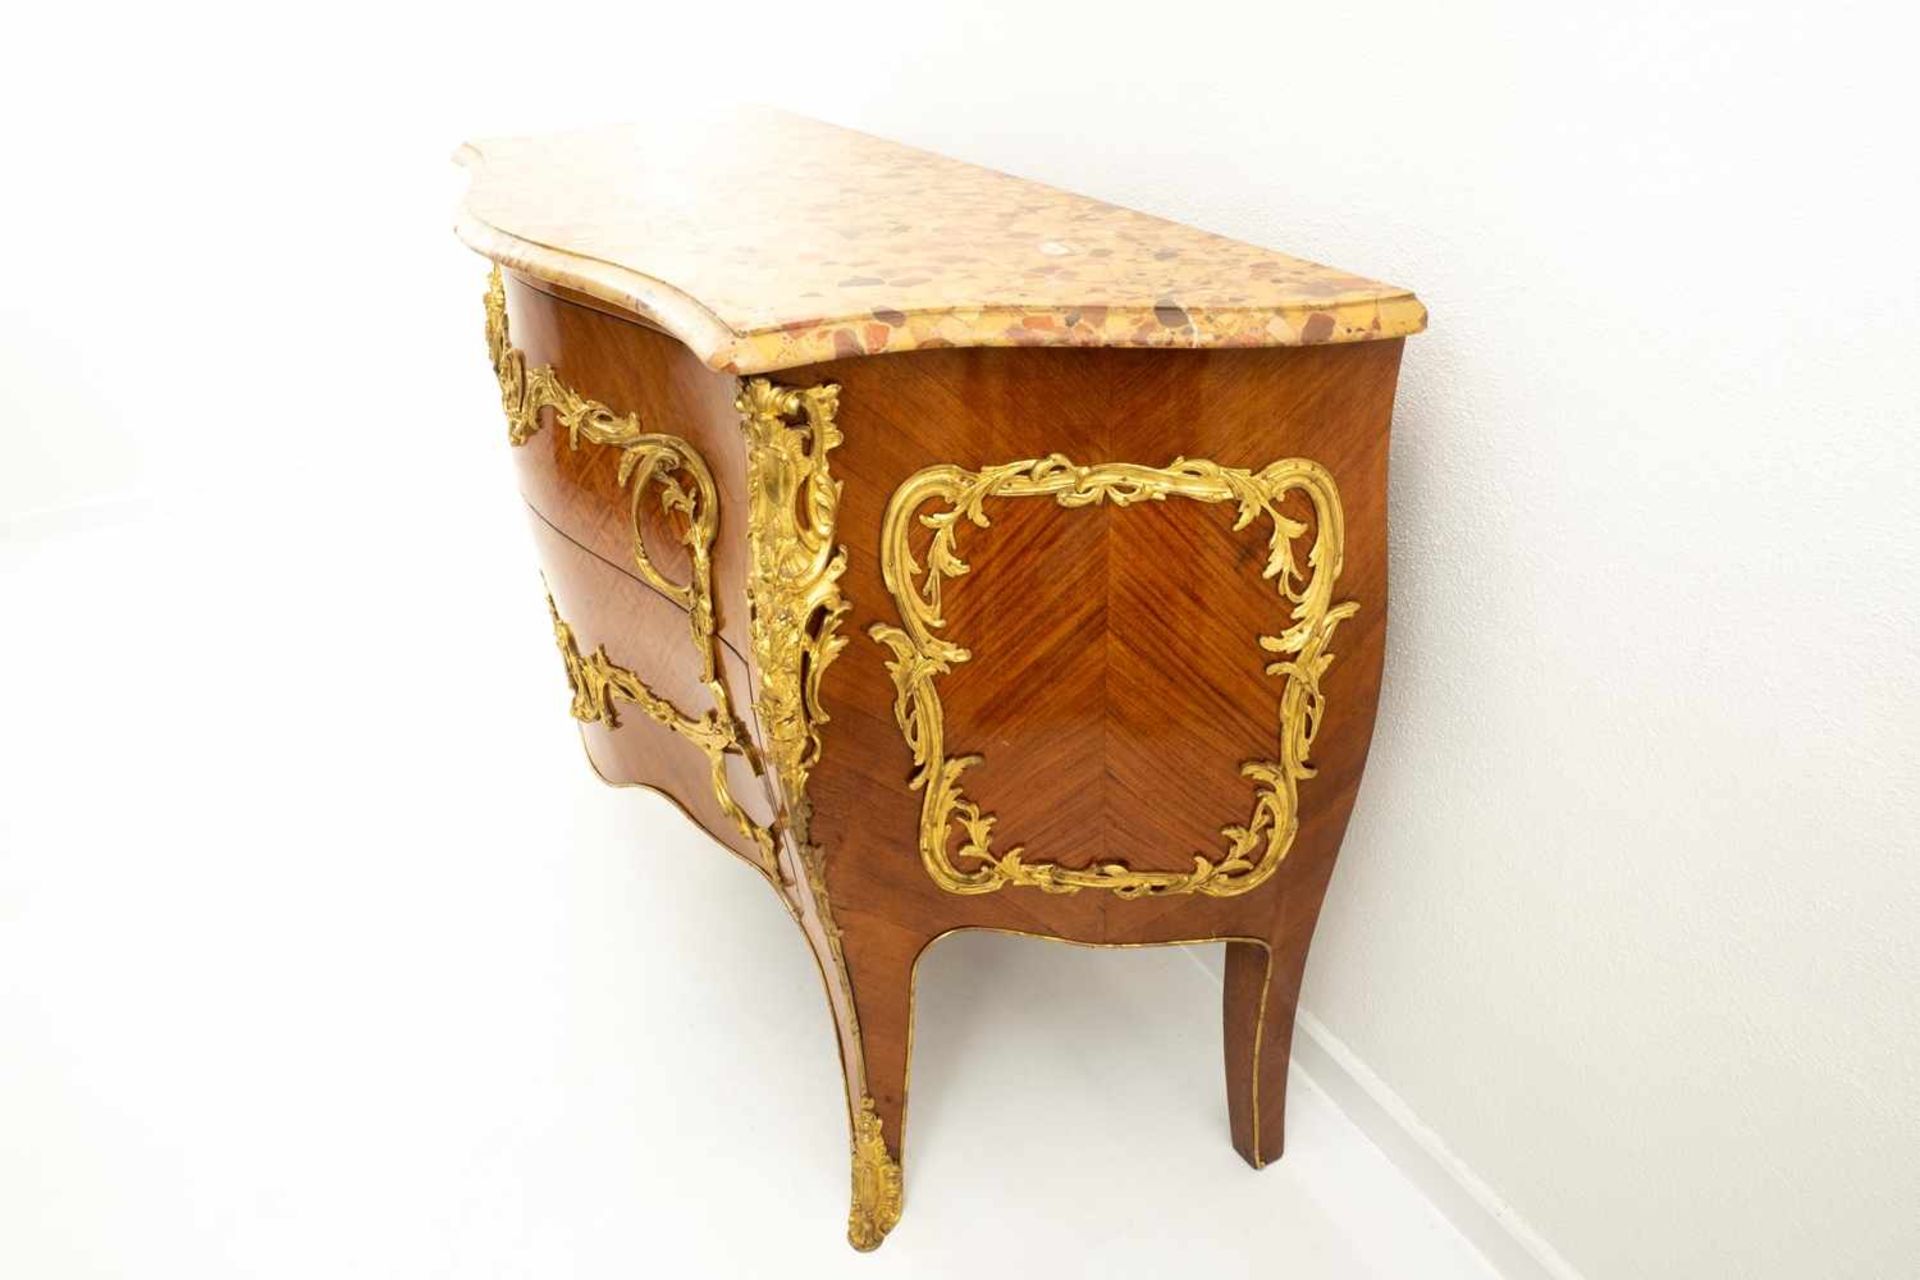 Bulging ornate chest of drawers with bronze appliqué< - Image 5 of 8